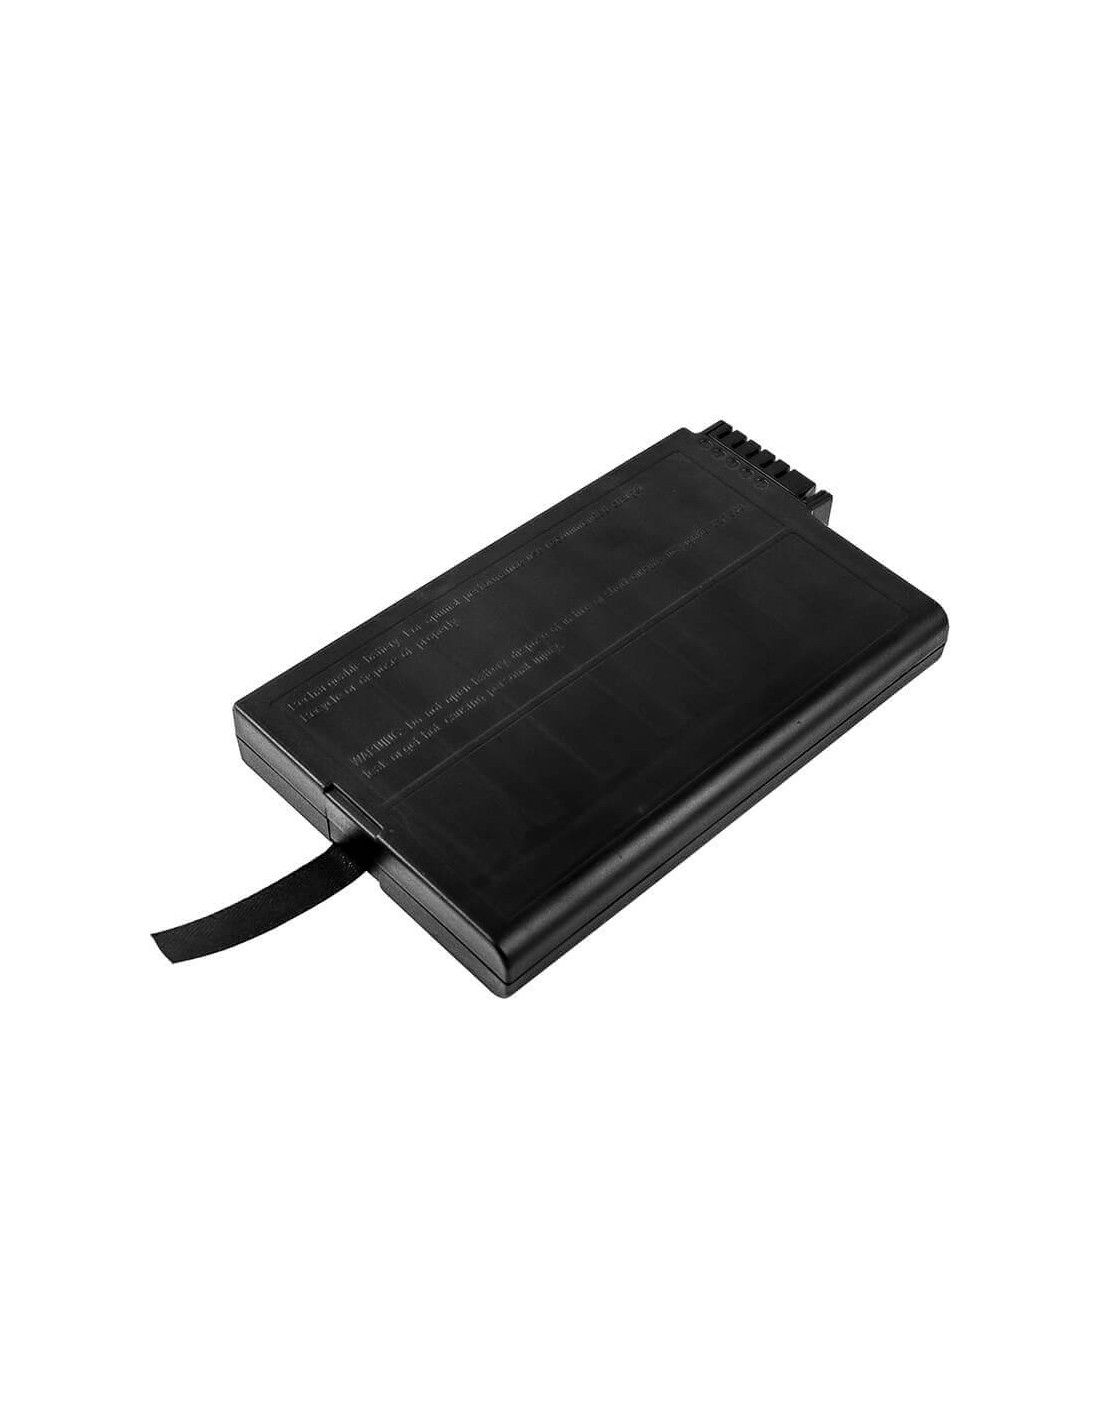 Battery for Philips Intellivue Mp20, Intellivue Mp30, Intellivue Mp50 10.8V, 7200mAh - 77.76Wh